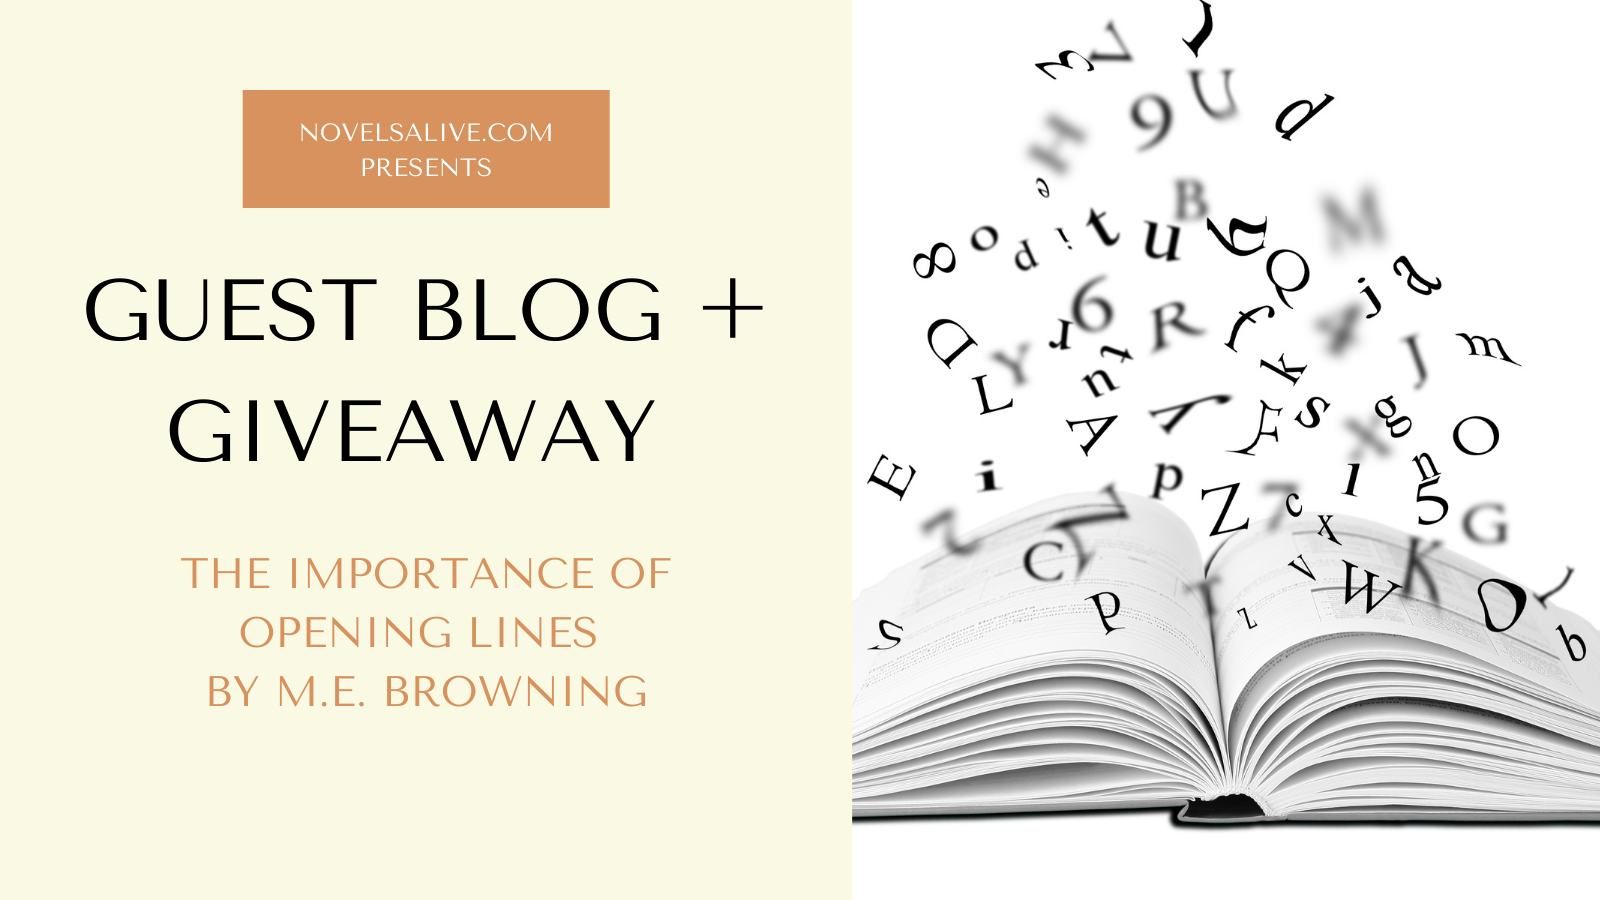 Novels Alive  GUEST BLOG: The Importance of Opening Lines by M.E. Browning  Plus Giveaway!